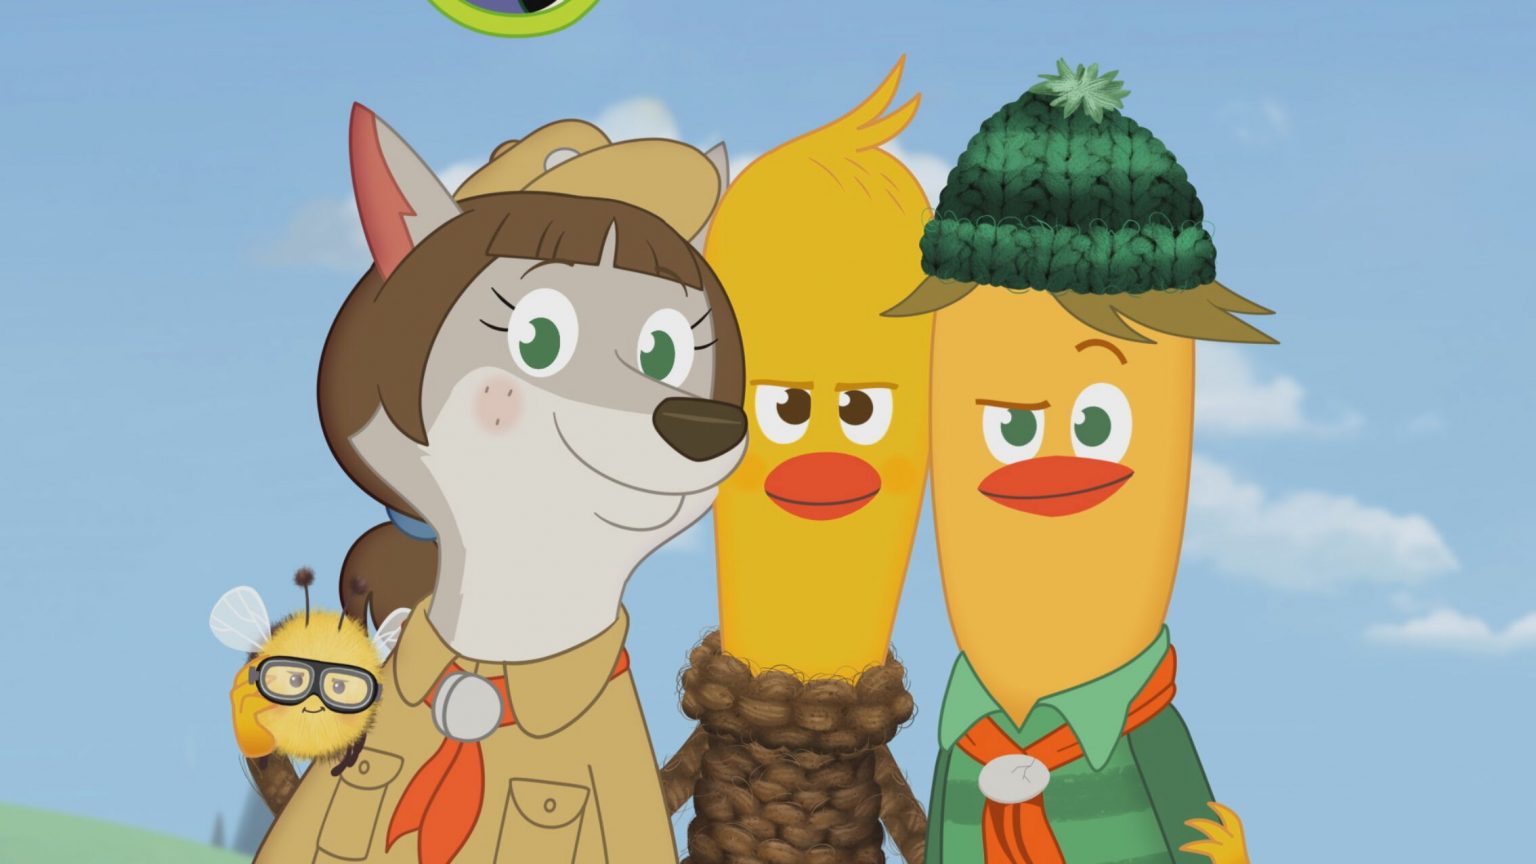 Join Archibald, a cheerful and adventurous chicken, as he embarks on whimsical adventures with his friends. This animated series is full of humor, heart, and positive messages about embracing life's unexpected twists and turns.]]>